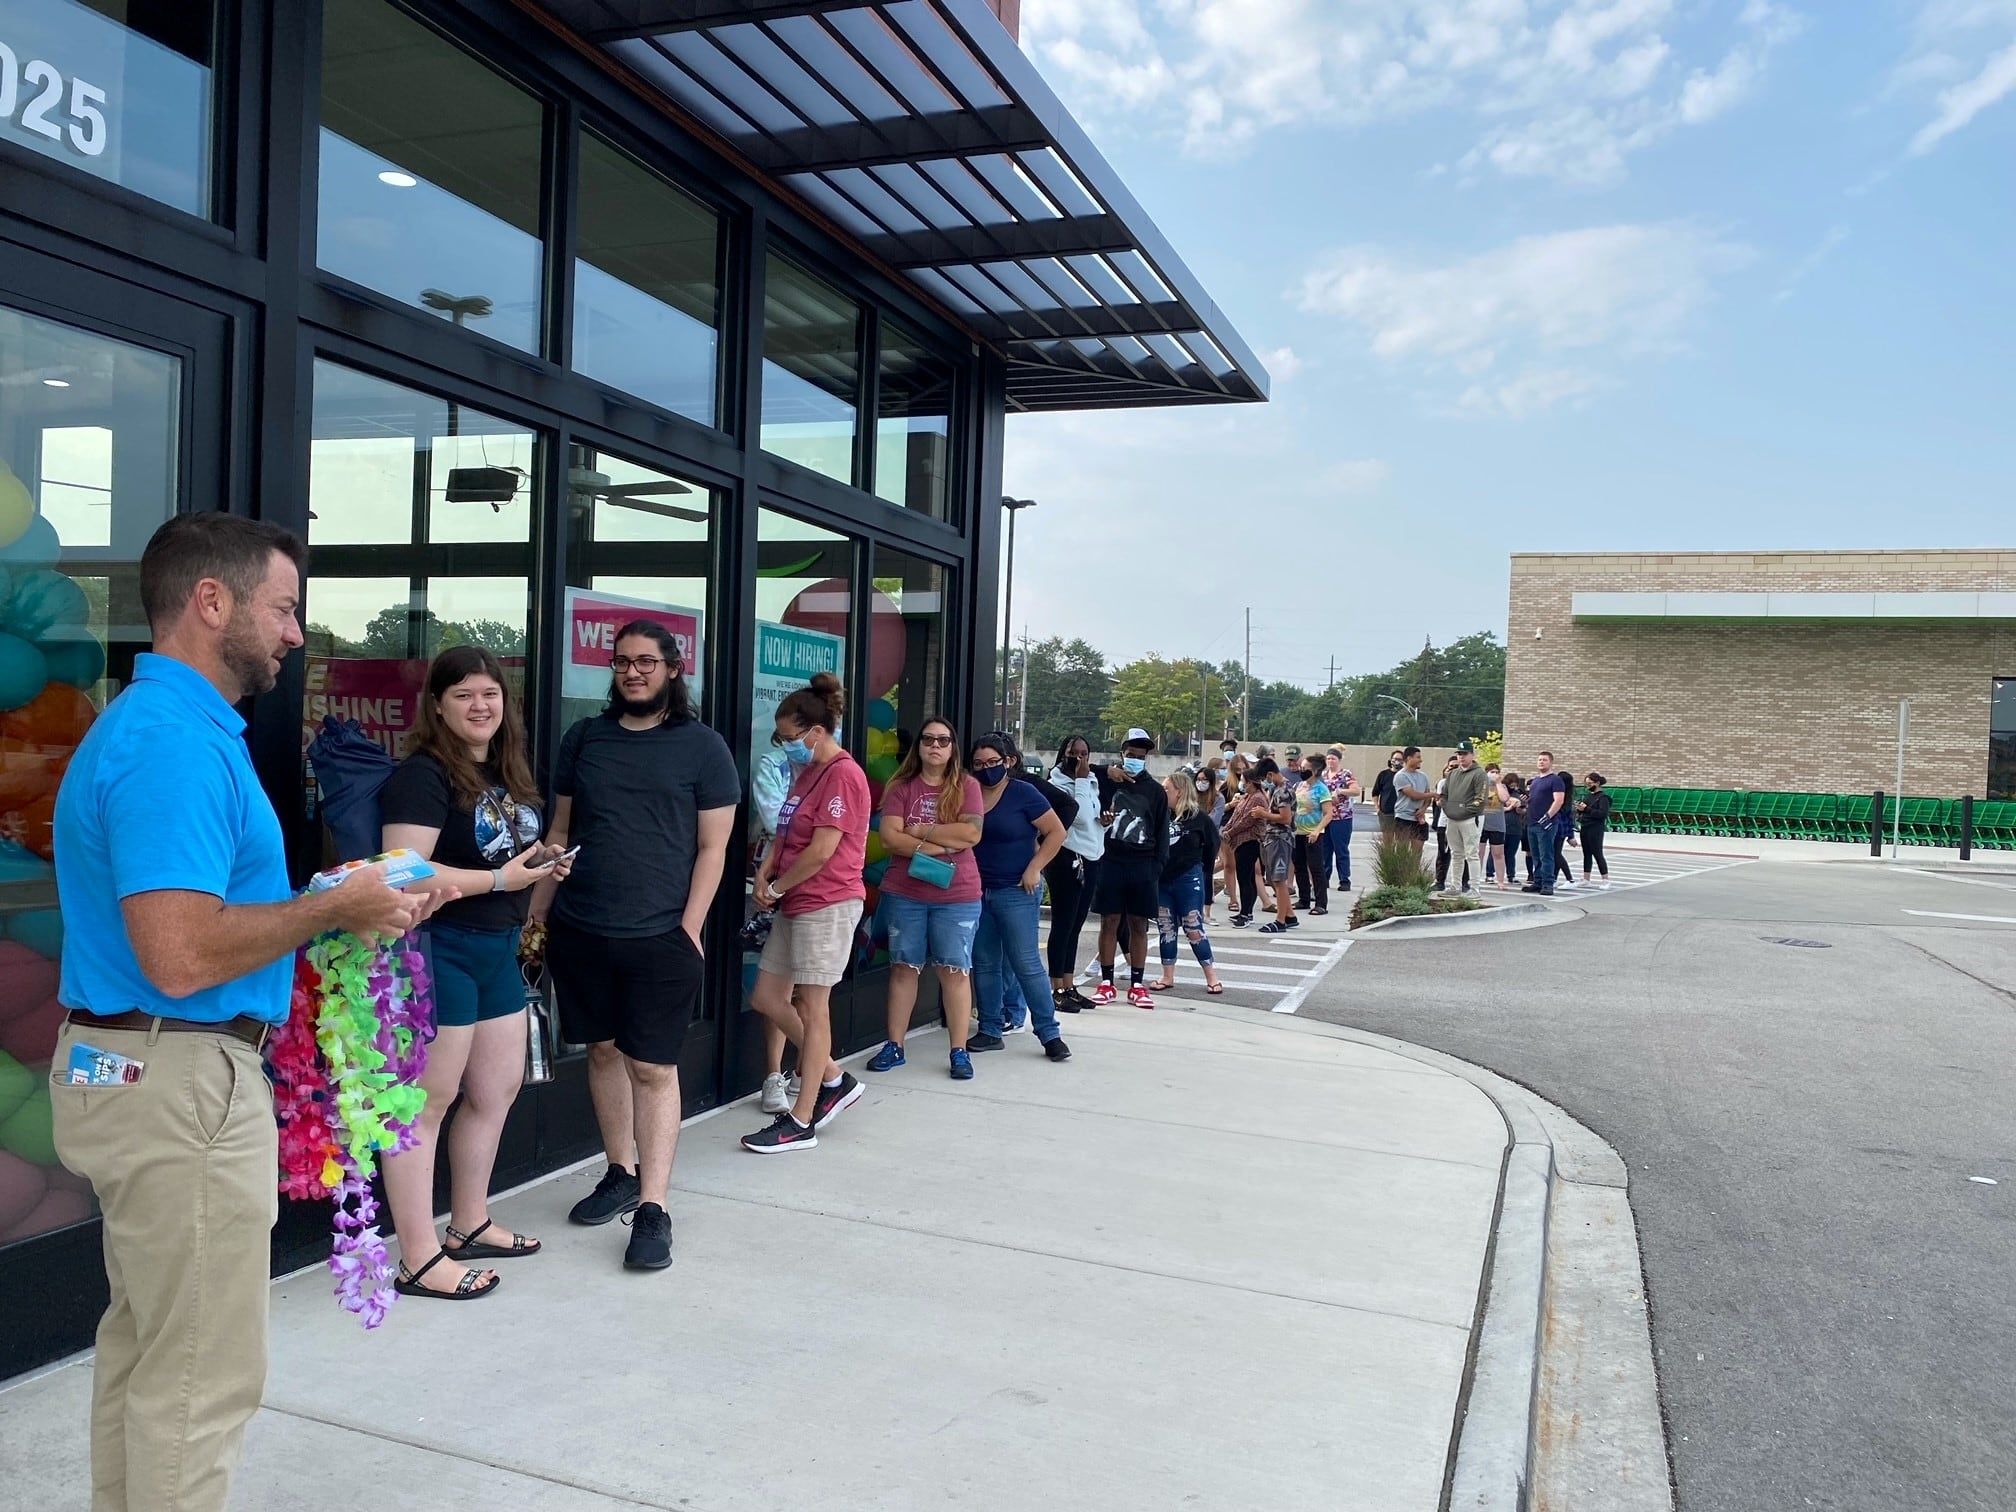 Guests waiting in line for a free smoothie at Grand Opening